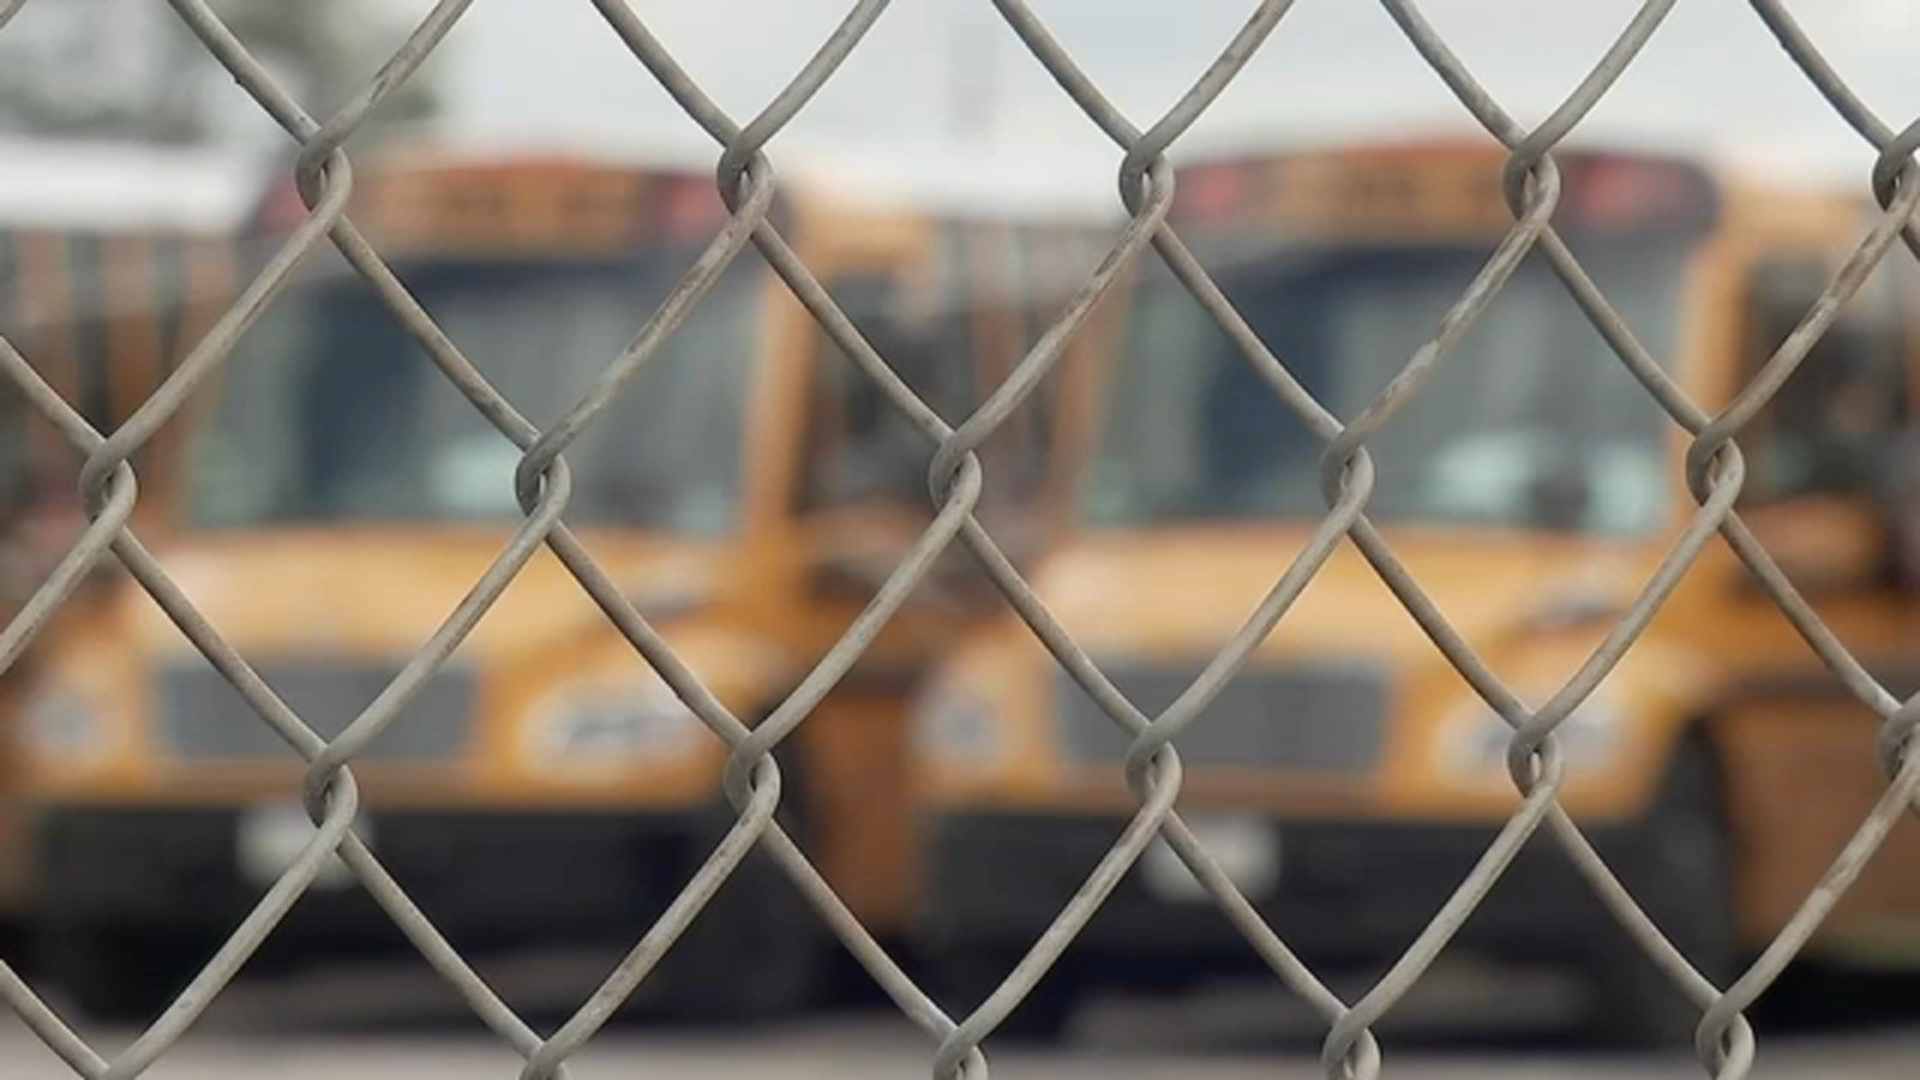 Bus Hot Rap Sex - Aldine ISD elementary student repeatedly raped on school bus by older boy,  6-year-old's mother says - ABC13 Houston